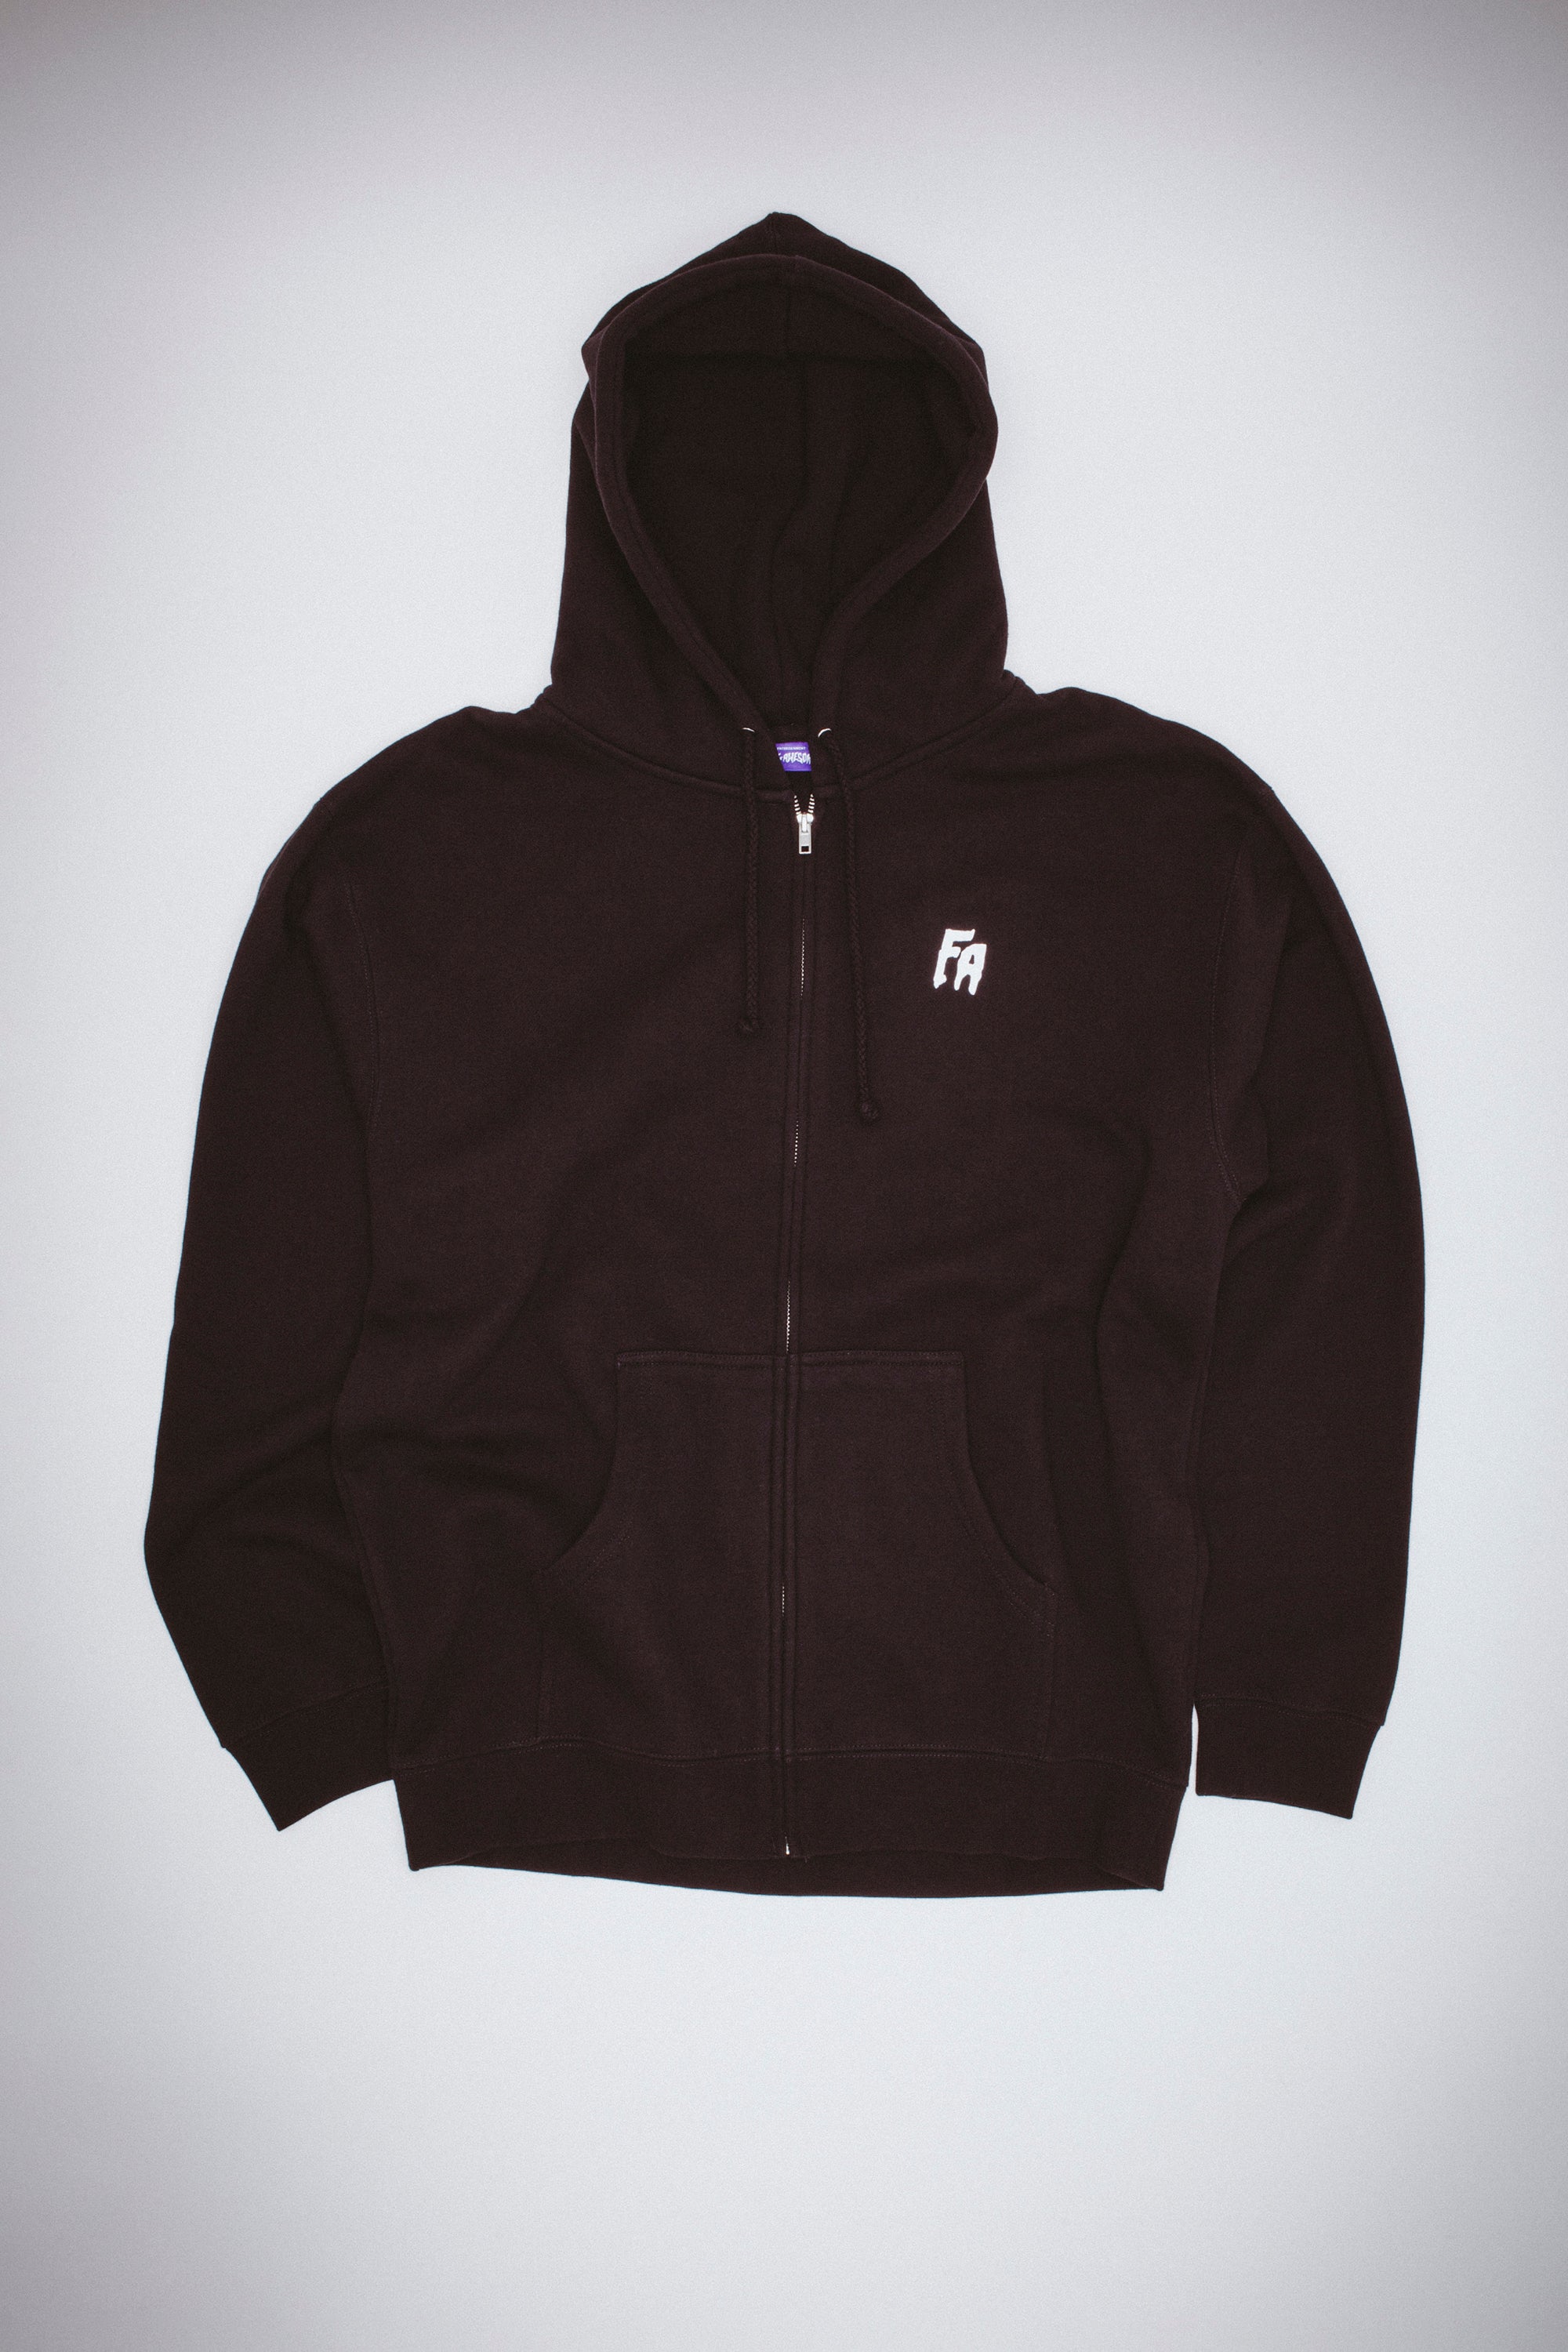 SOW Zip Hoodie – Fucking Awesome